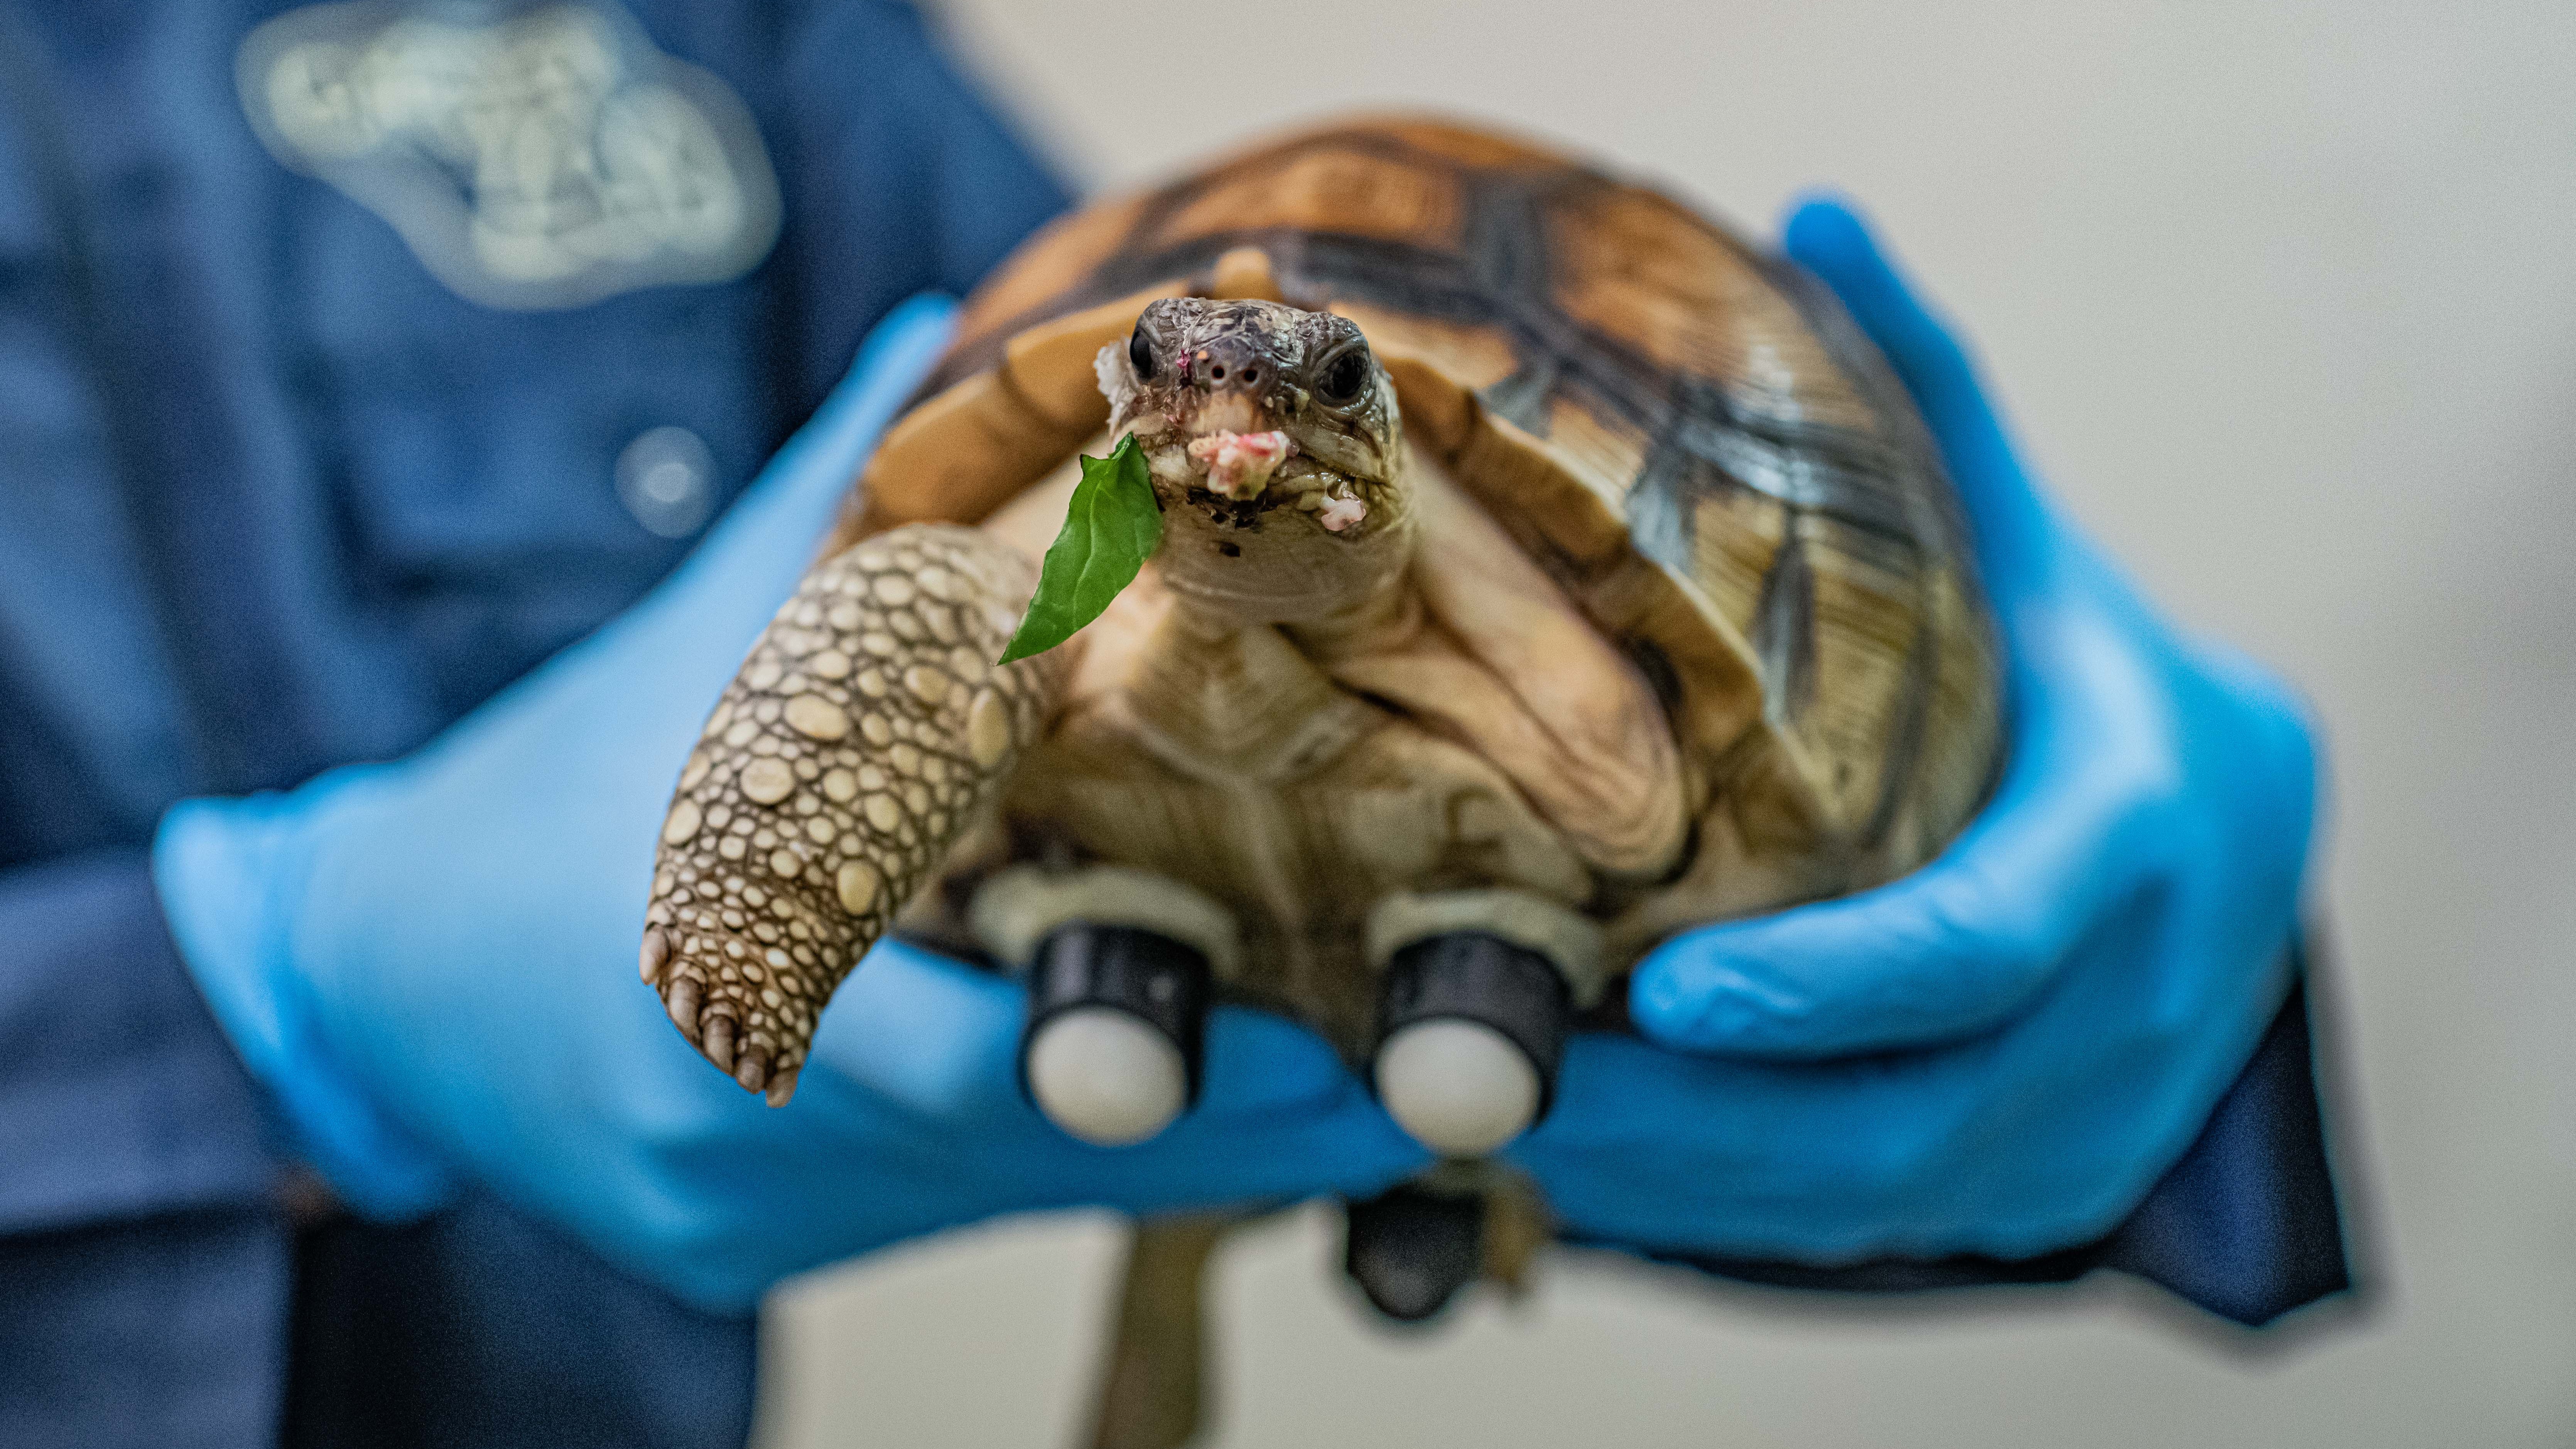 Three legged tortoise given new lease of life with new wheels at Chester  Zoo | ITV News Granada